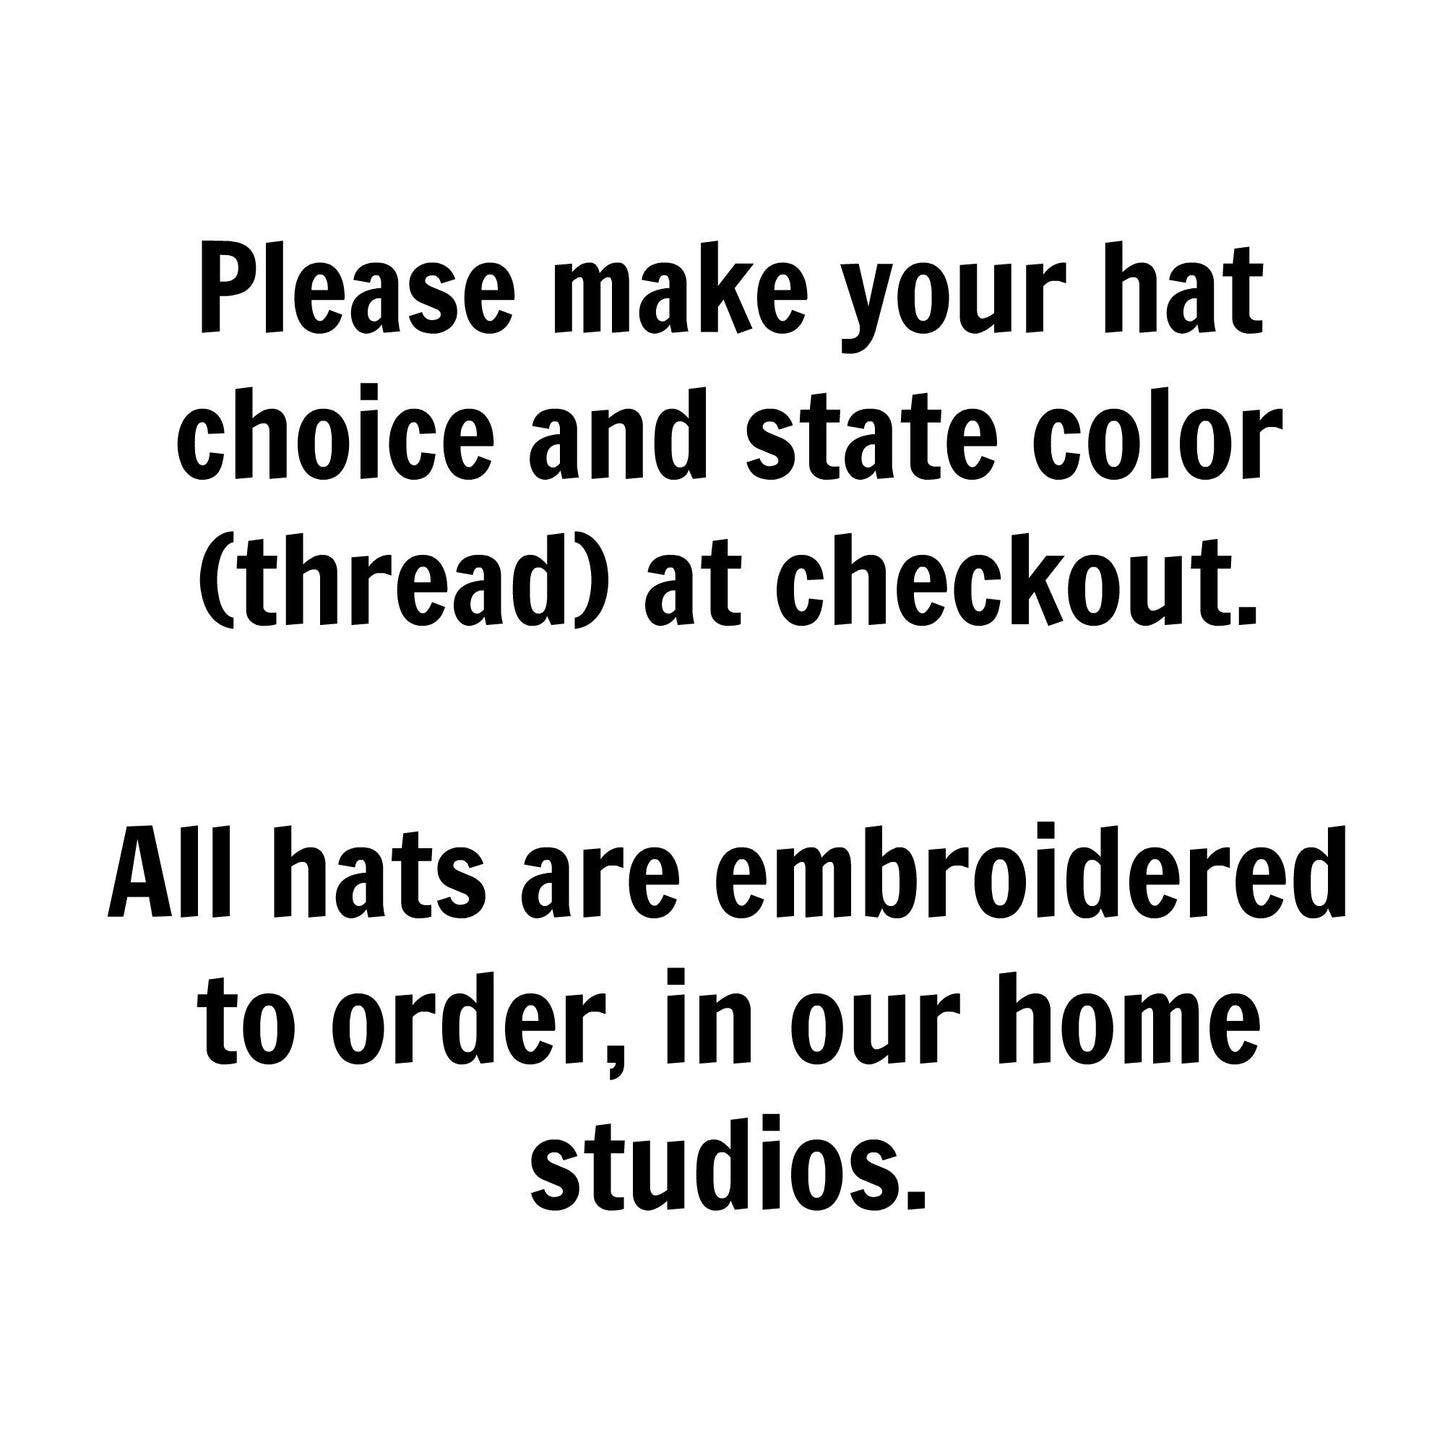 Alabama Hat - Classic Dad Hat - Many Color Combinations